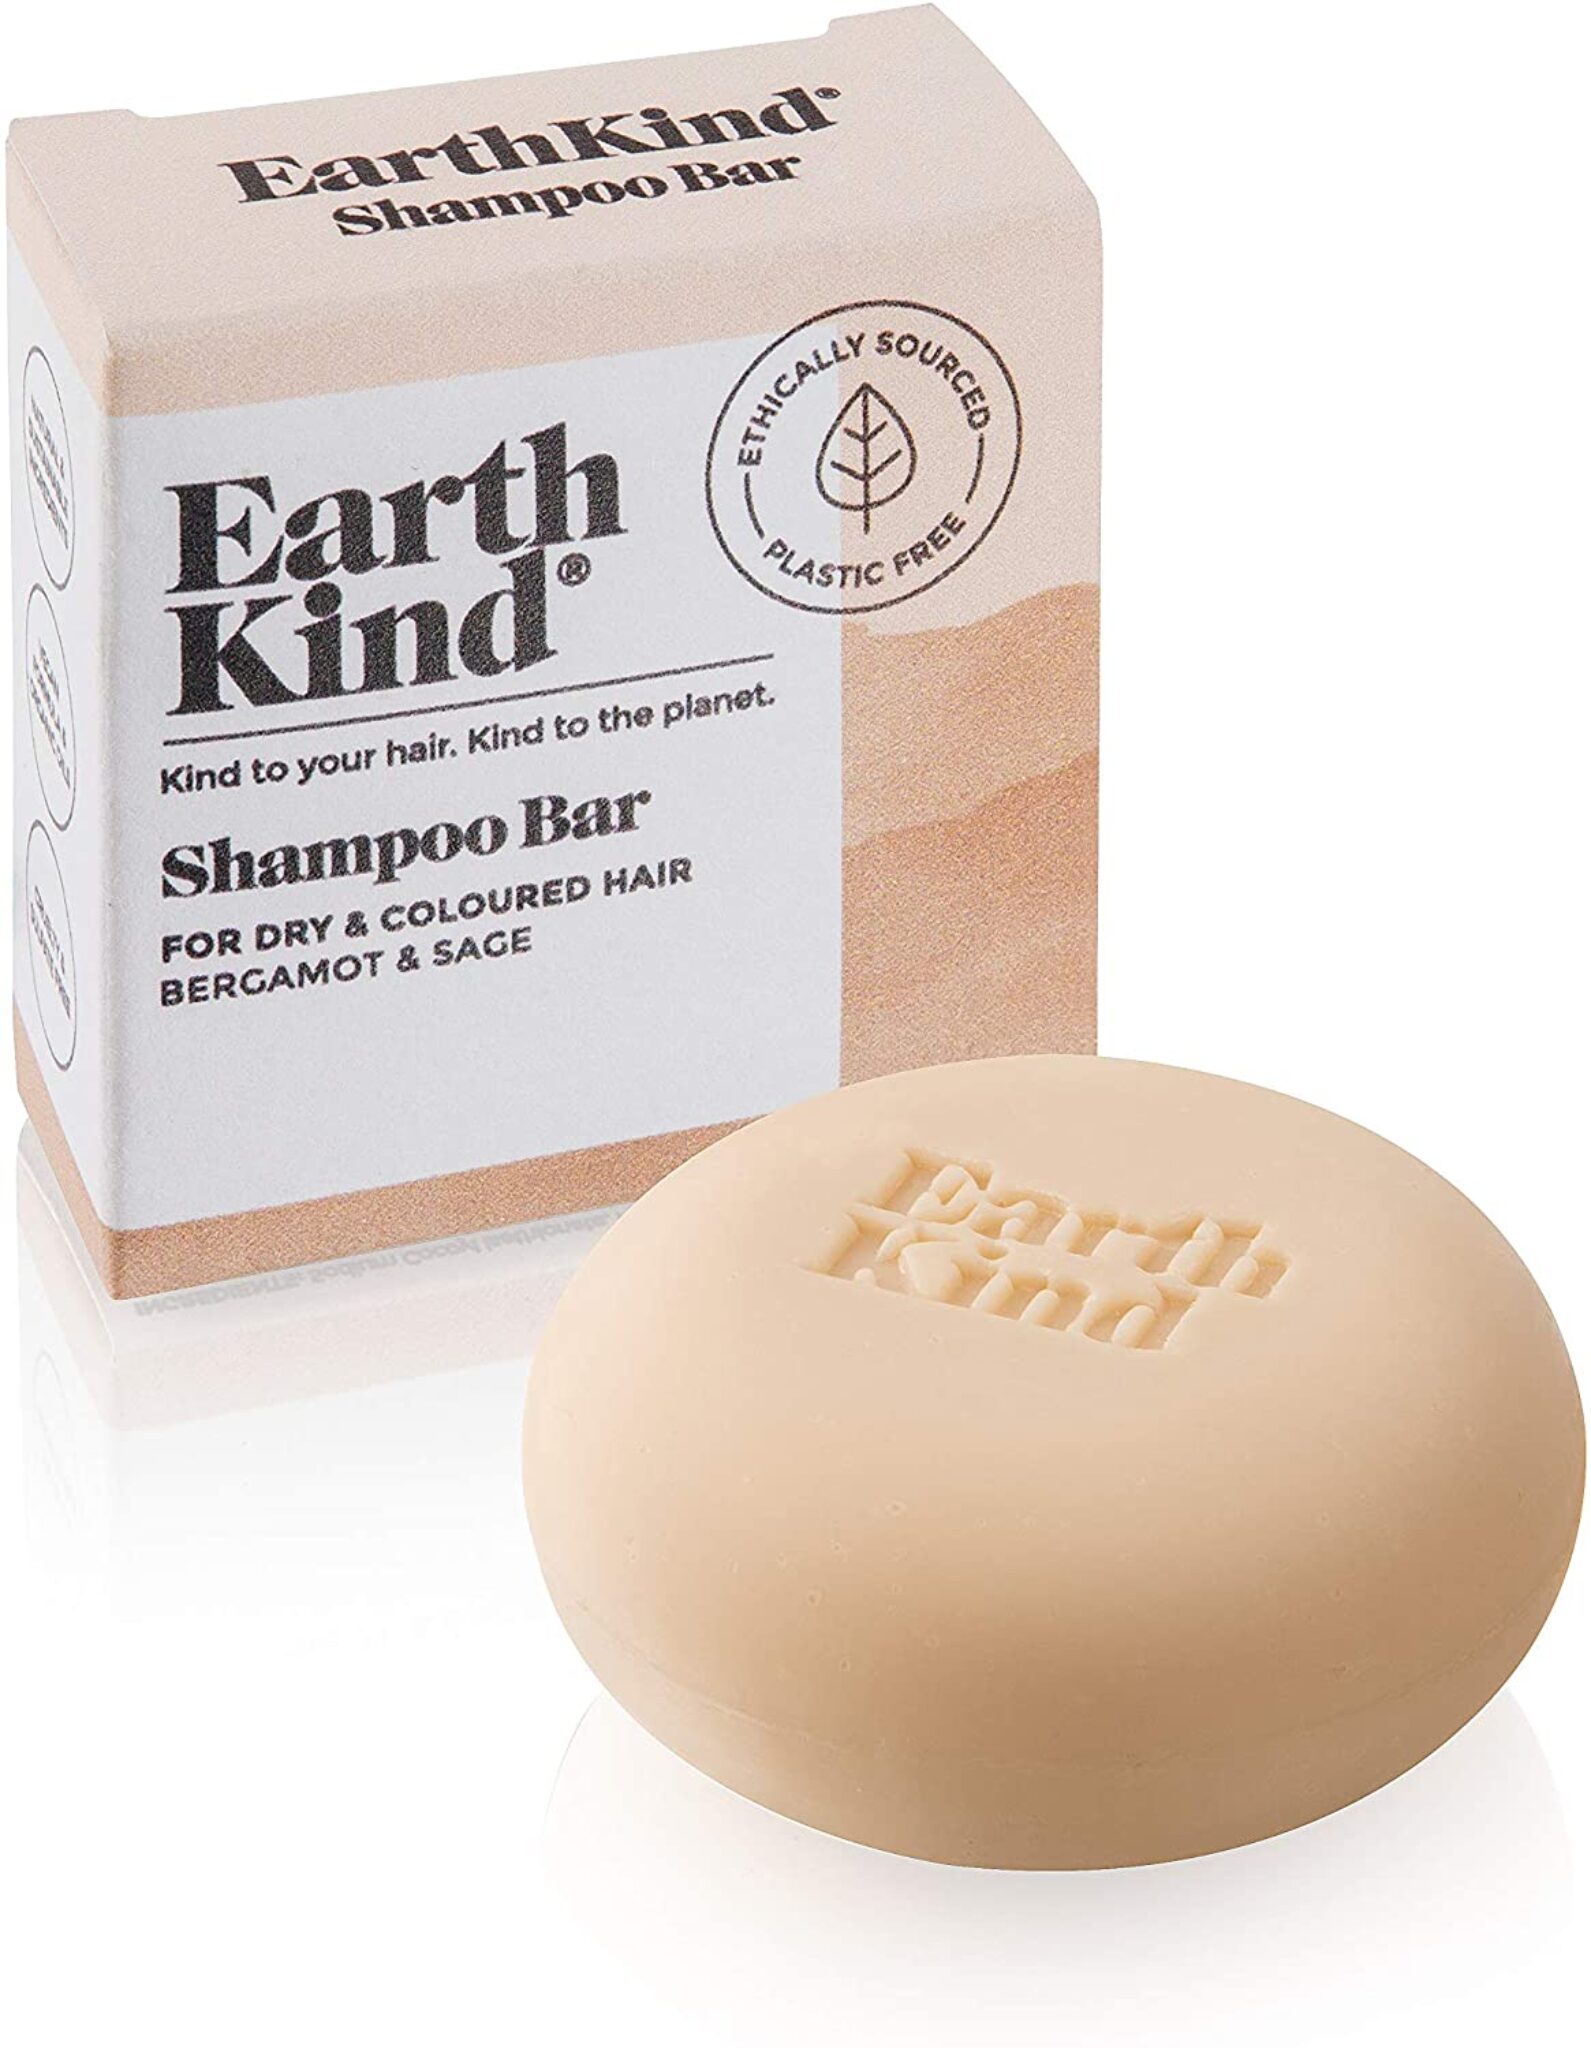 Best Shampoo Bars For Curly Hair 2021 AllNatural Hair Care Products